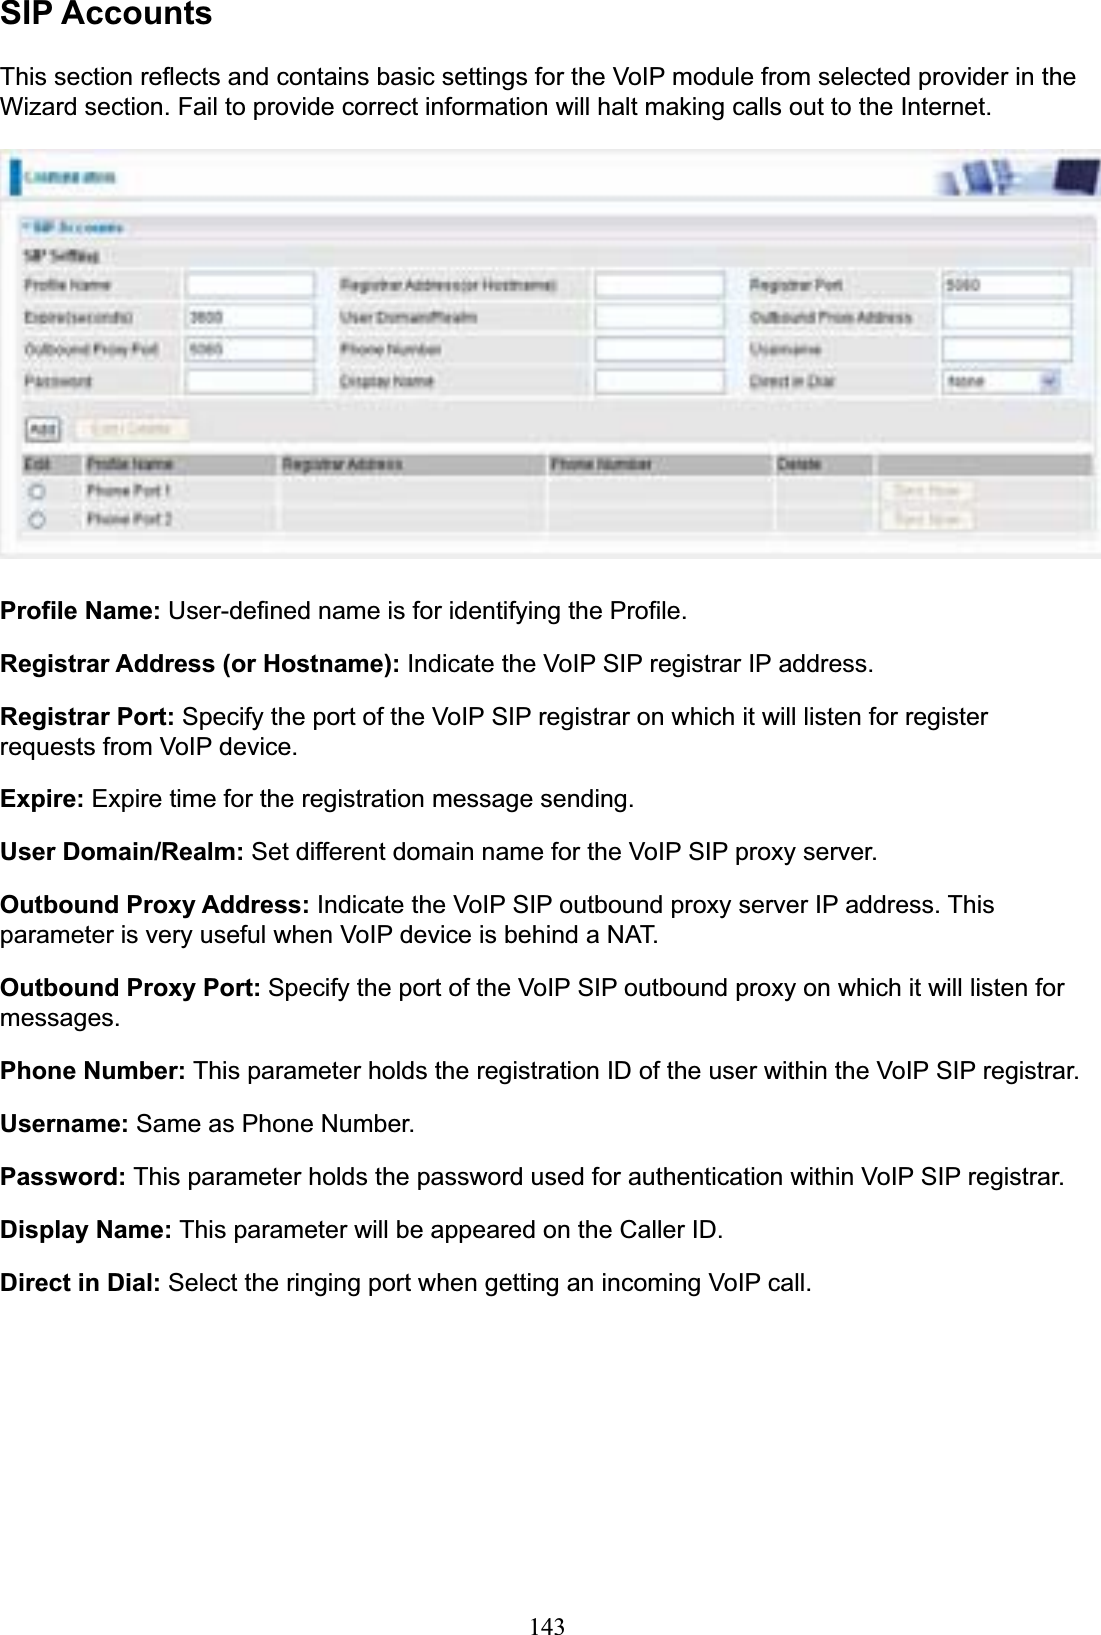 143SIP AccountsThis section reflects and contains basic settings for the VoIP module from selected provider in the Wizard section. Fail to provide correct information will halt making calls out to the Internet. Profile Name: User-defined name is for identifying the Profile. Registrar Address (or Hostname): Indicate the VoIP SIP registrar IP address. Registrar Port: Specify the port of the VoIP SIP registrar on which it will listen for register requests from VoIP device. Expire: Expire time for the registration message sending. User Domain/Realm: Set different domain name for the VoIP SIP proxy server. Outbound Proxy Address: Indicate the VoIP SIP outbound proxy server IP address. This parameter is very useful when VoIP device is behind a NAT. Outbound Proxy Port: Specify the port of the VoIP SIP outbound proxy on which it will listen for messages.Phone Number: This parameter holds the registration ID of the user within the VoIP SIP registrar. Username: Same as Phone Number. Password: This parameter holds the password used for authentication within VoIP SIP registrar. Display Name: This parameter will be appeared on the Caller ID. Direct in Dial: Select the ringing port when getting an incoming VoIP call. 